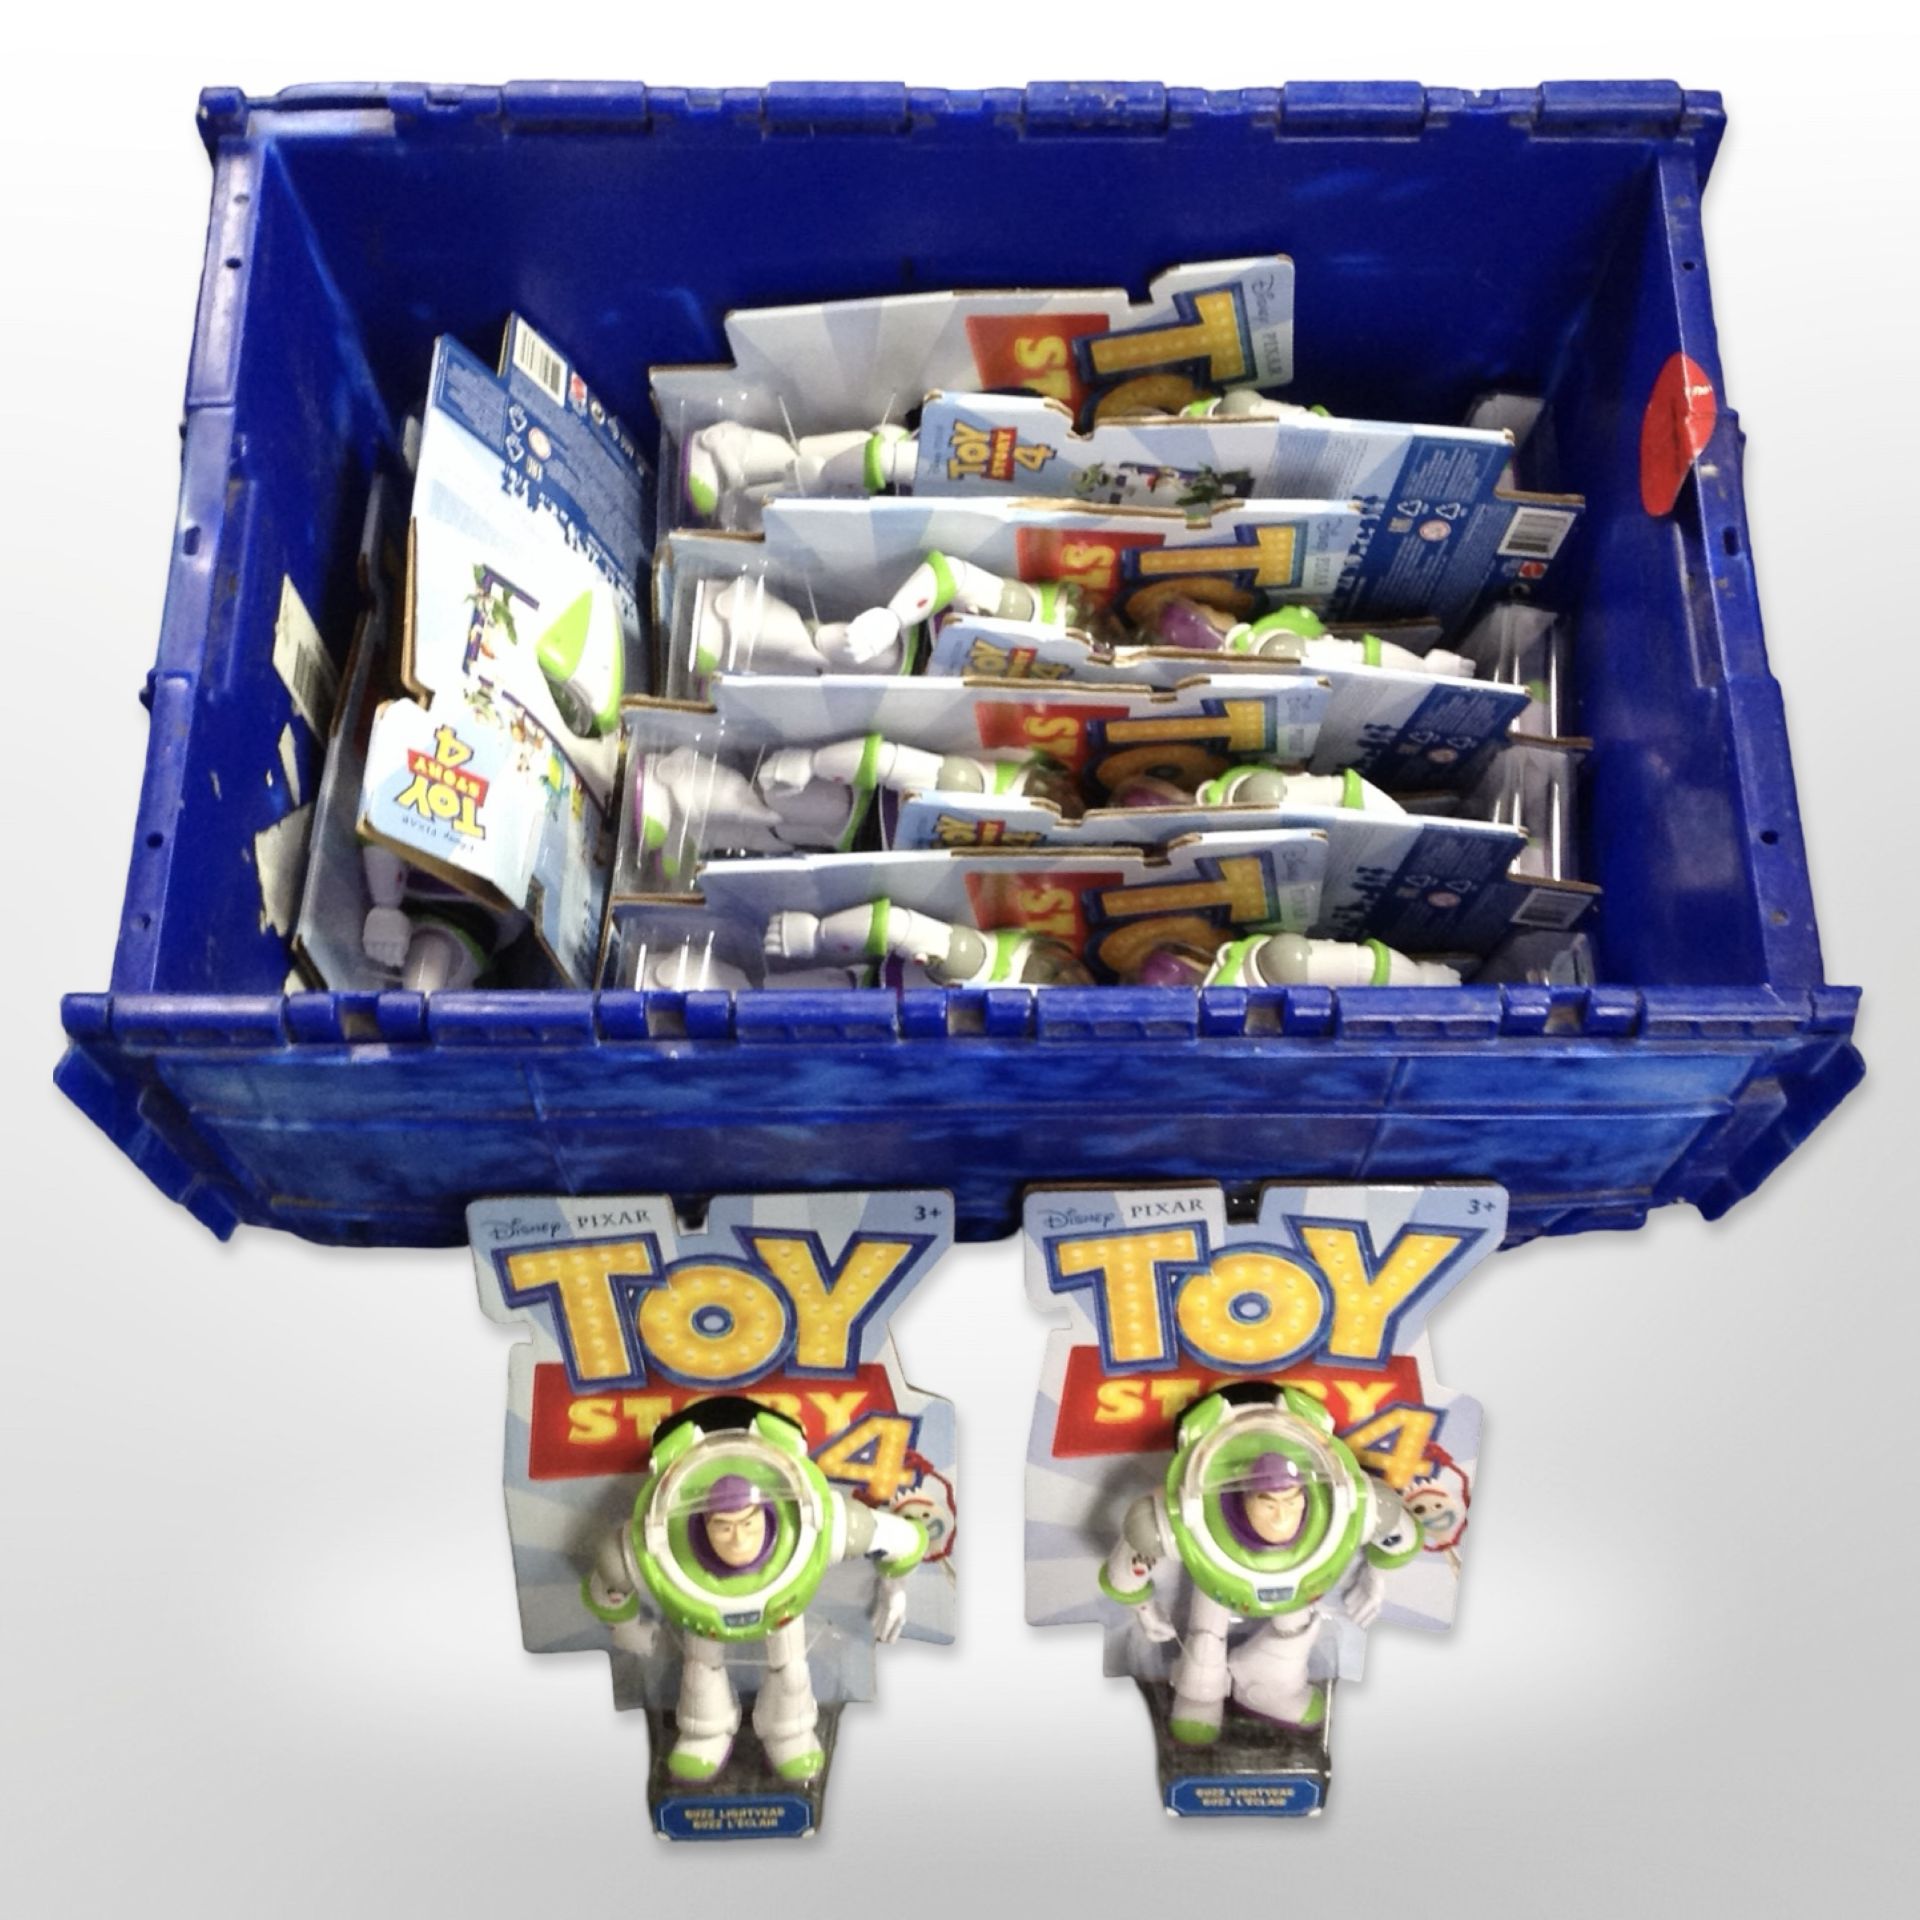 Approximately 20 Disney Pixar Toy Story Buzz Lightyear figurines, boxed.